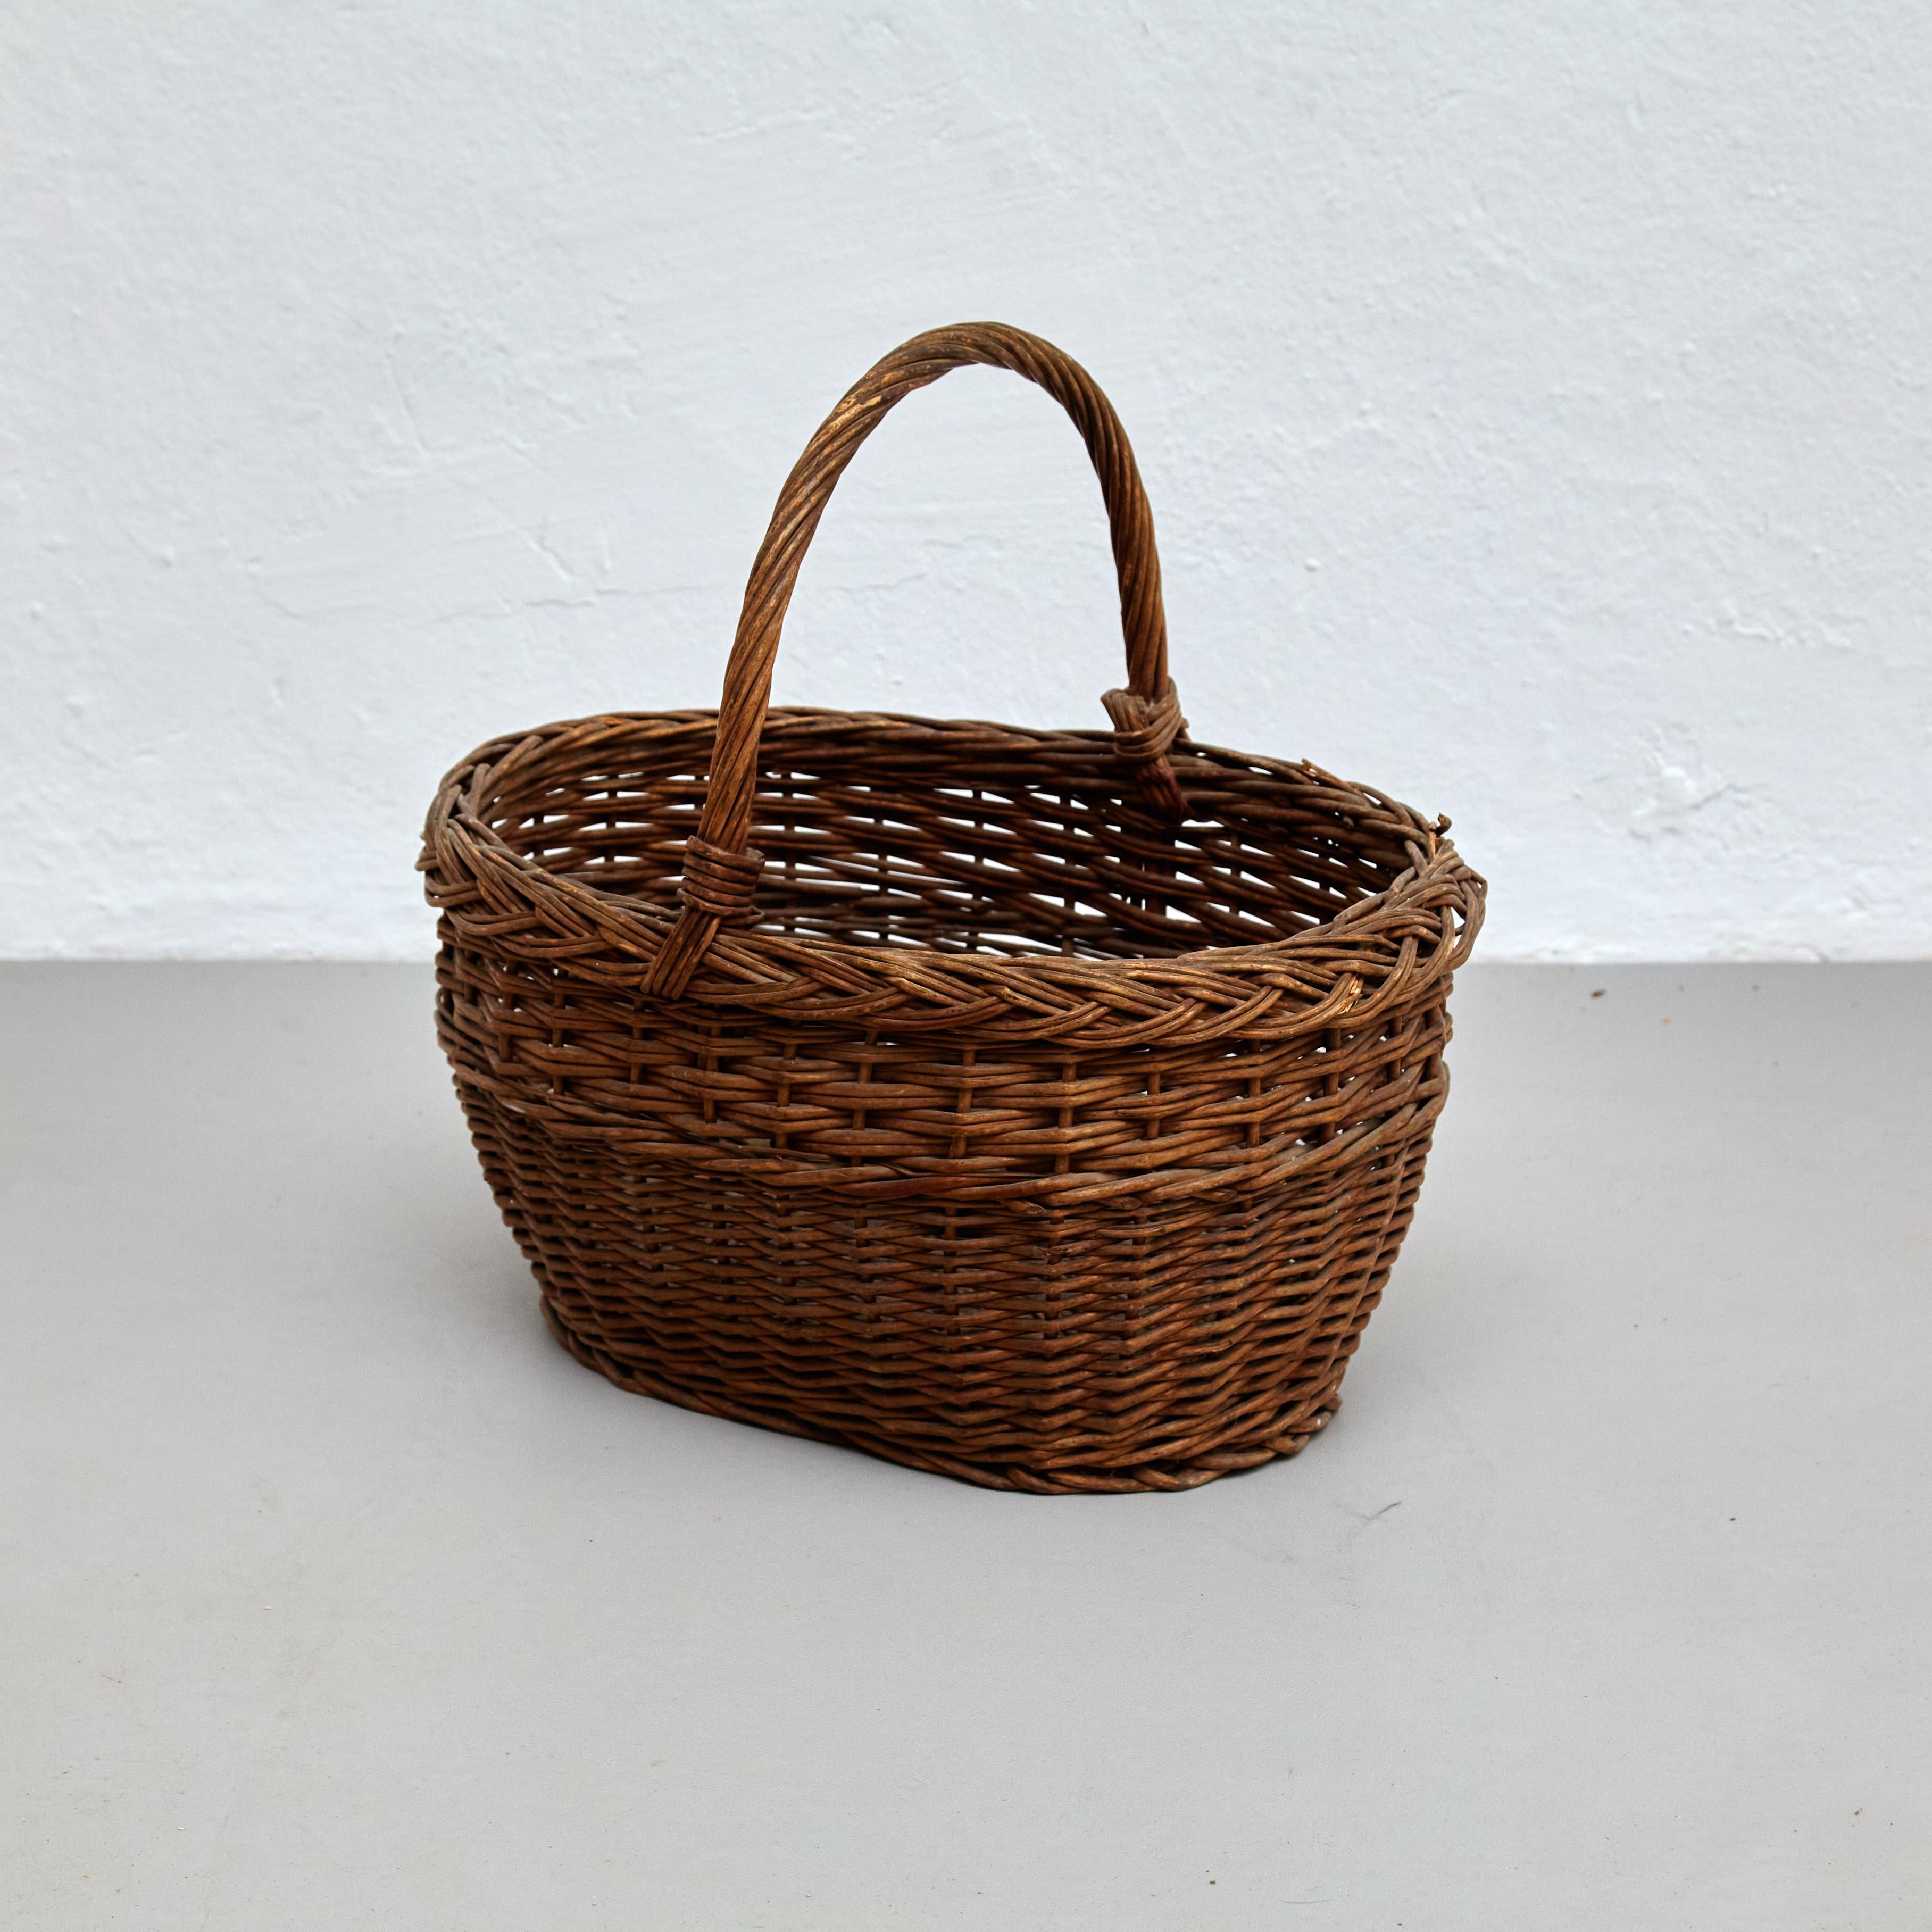 Mid-Century Modern Rattan Large Basket.

In original condition with minor wear consistent of age and use, preserving a beautiful patina.

Materials: 
Rattan 

Dimensions: 
D 33.5 cm x W 44 cm x H 42.5 cm.

Important information regarding